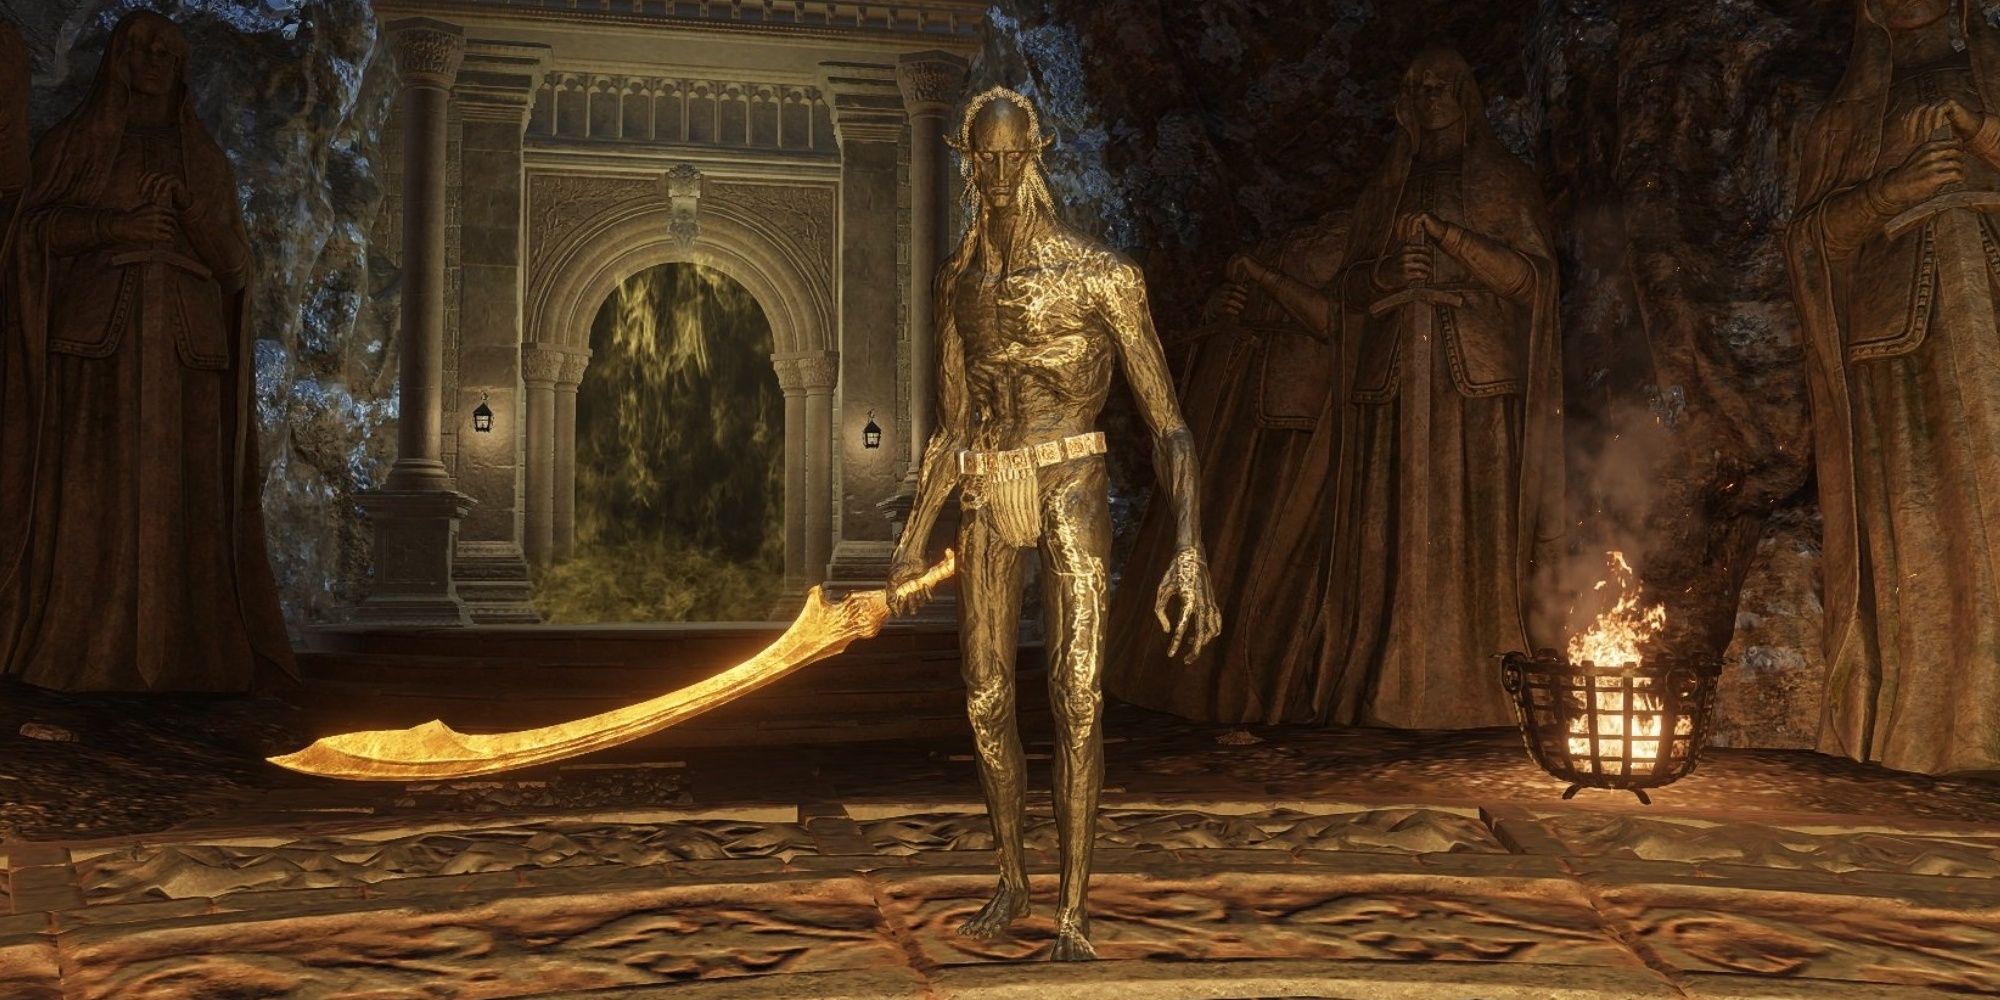 The Onyx Lord approaches with a sword in hand in Elden Ring.